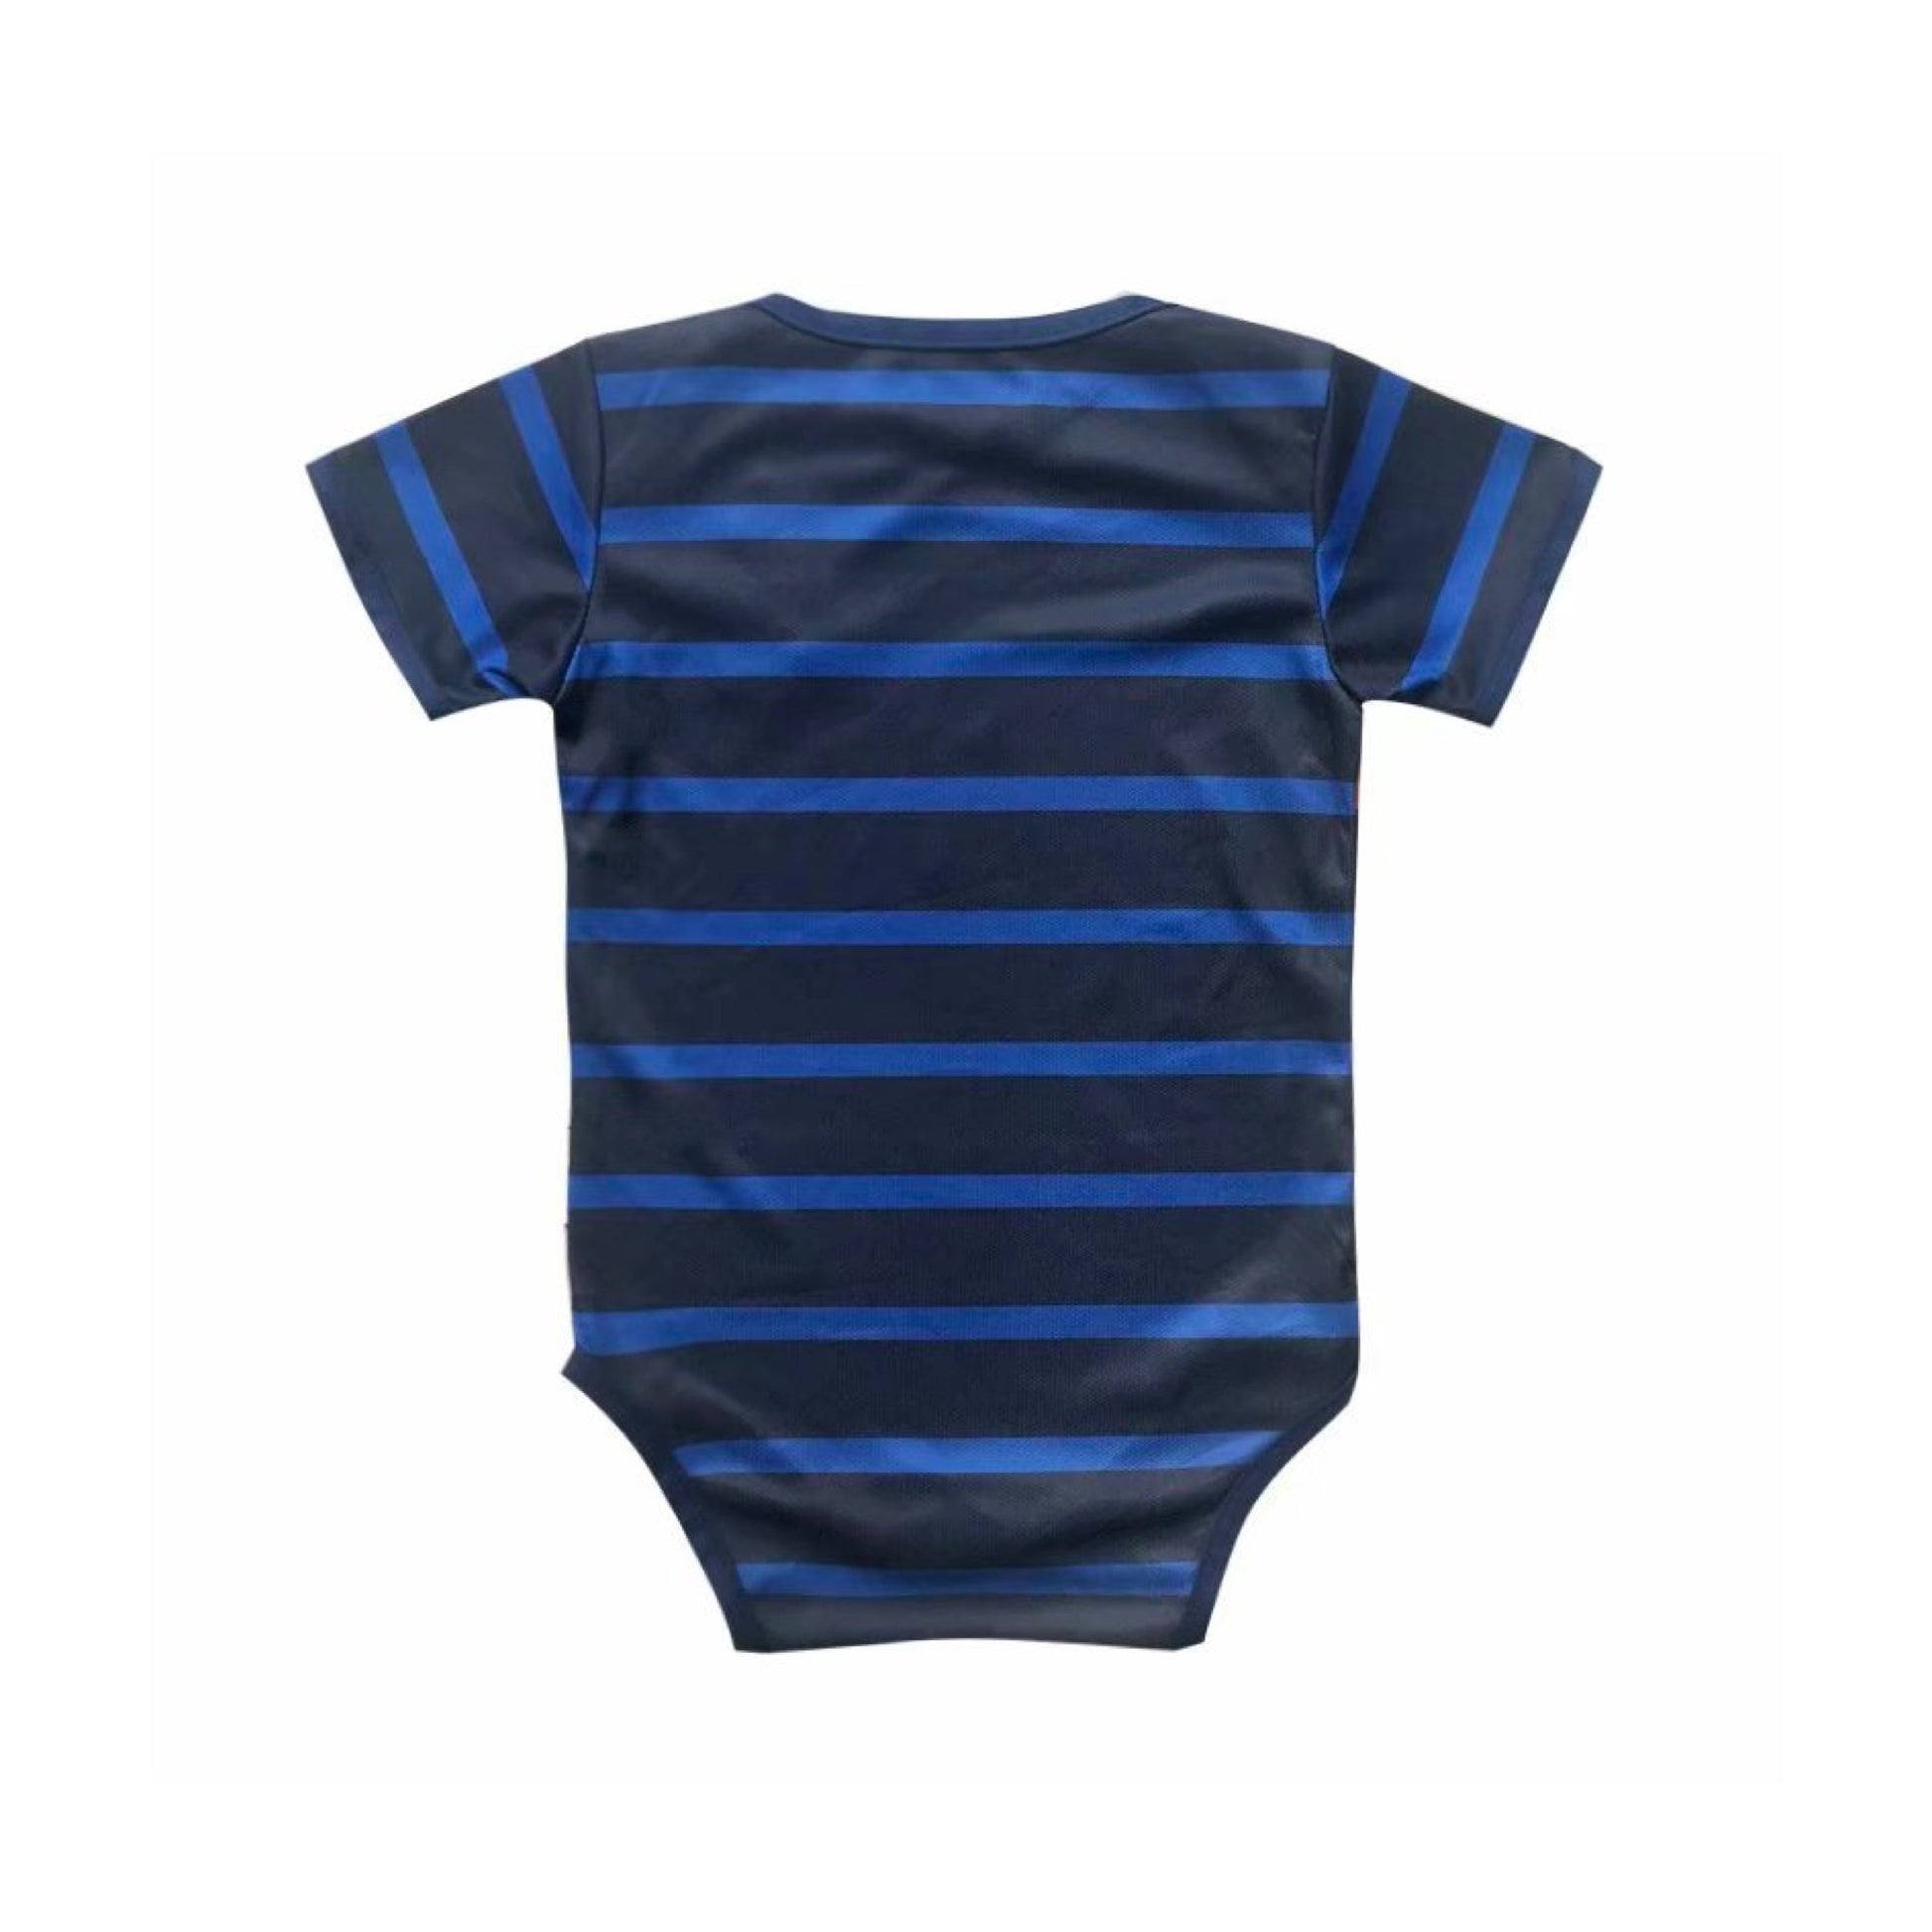 France Home Baby Jersey 2020-21 - Mitani Store